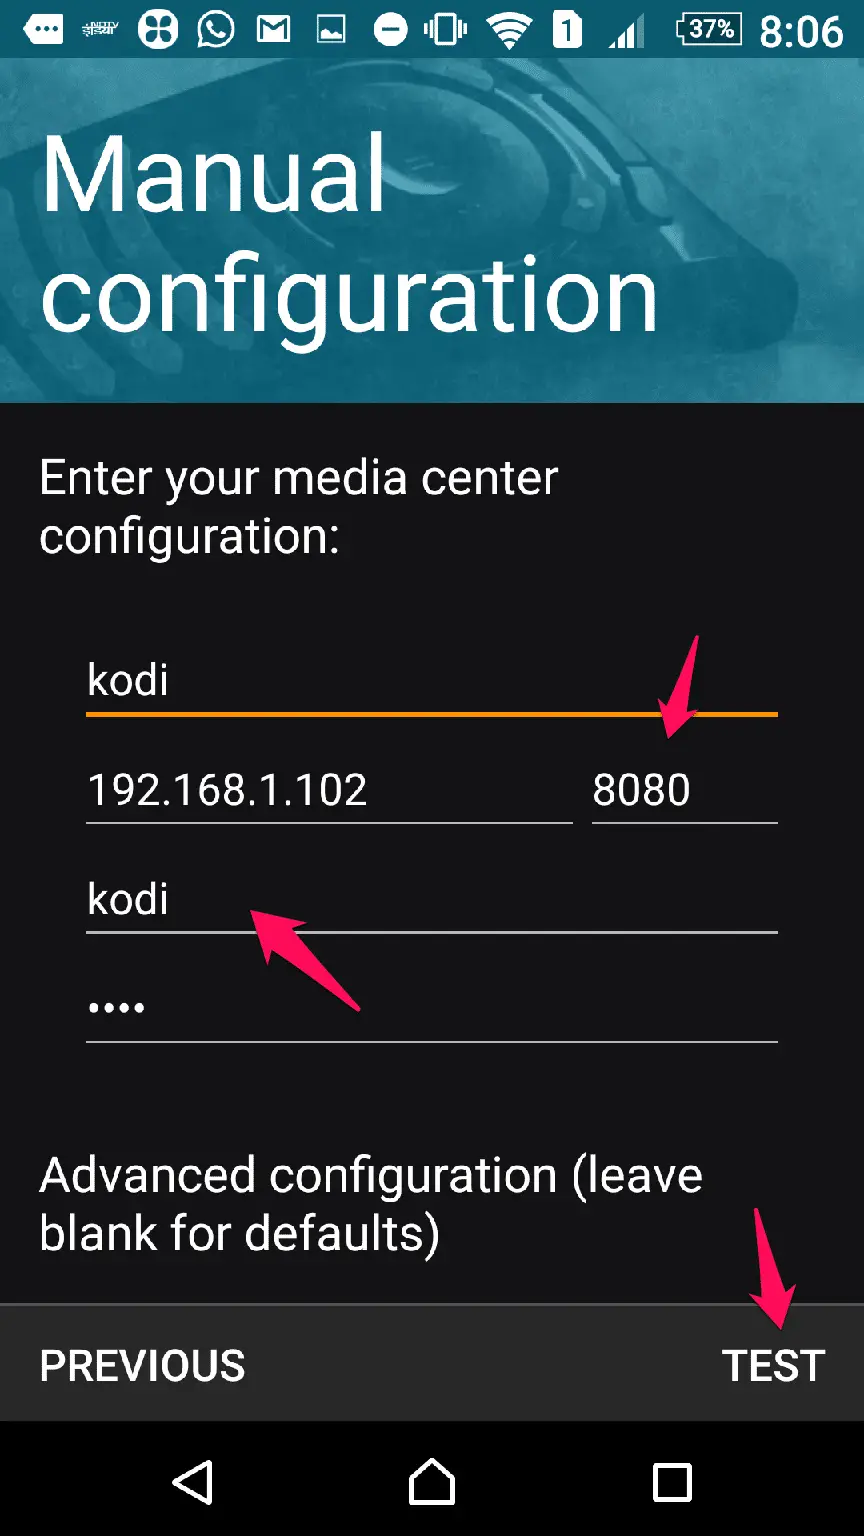 How To Control Kodi From a Smartphone